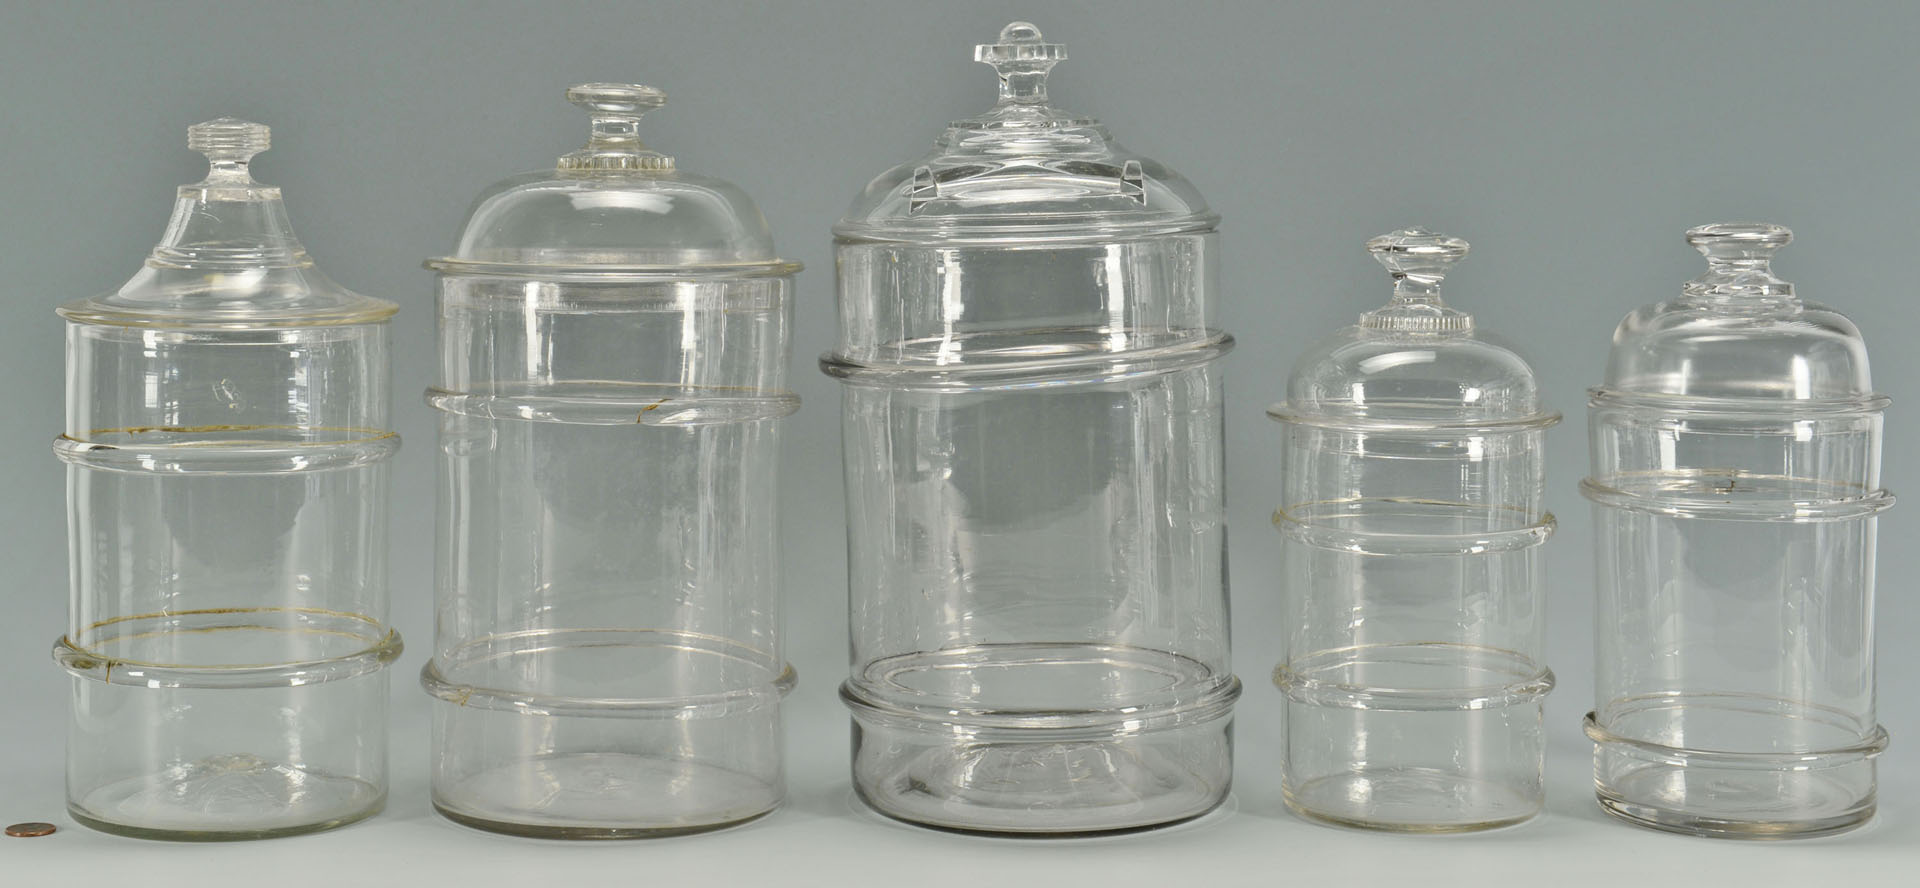 Lot 155: 5 Blown Colorless Glass Canister Jars, 2 bands